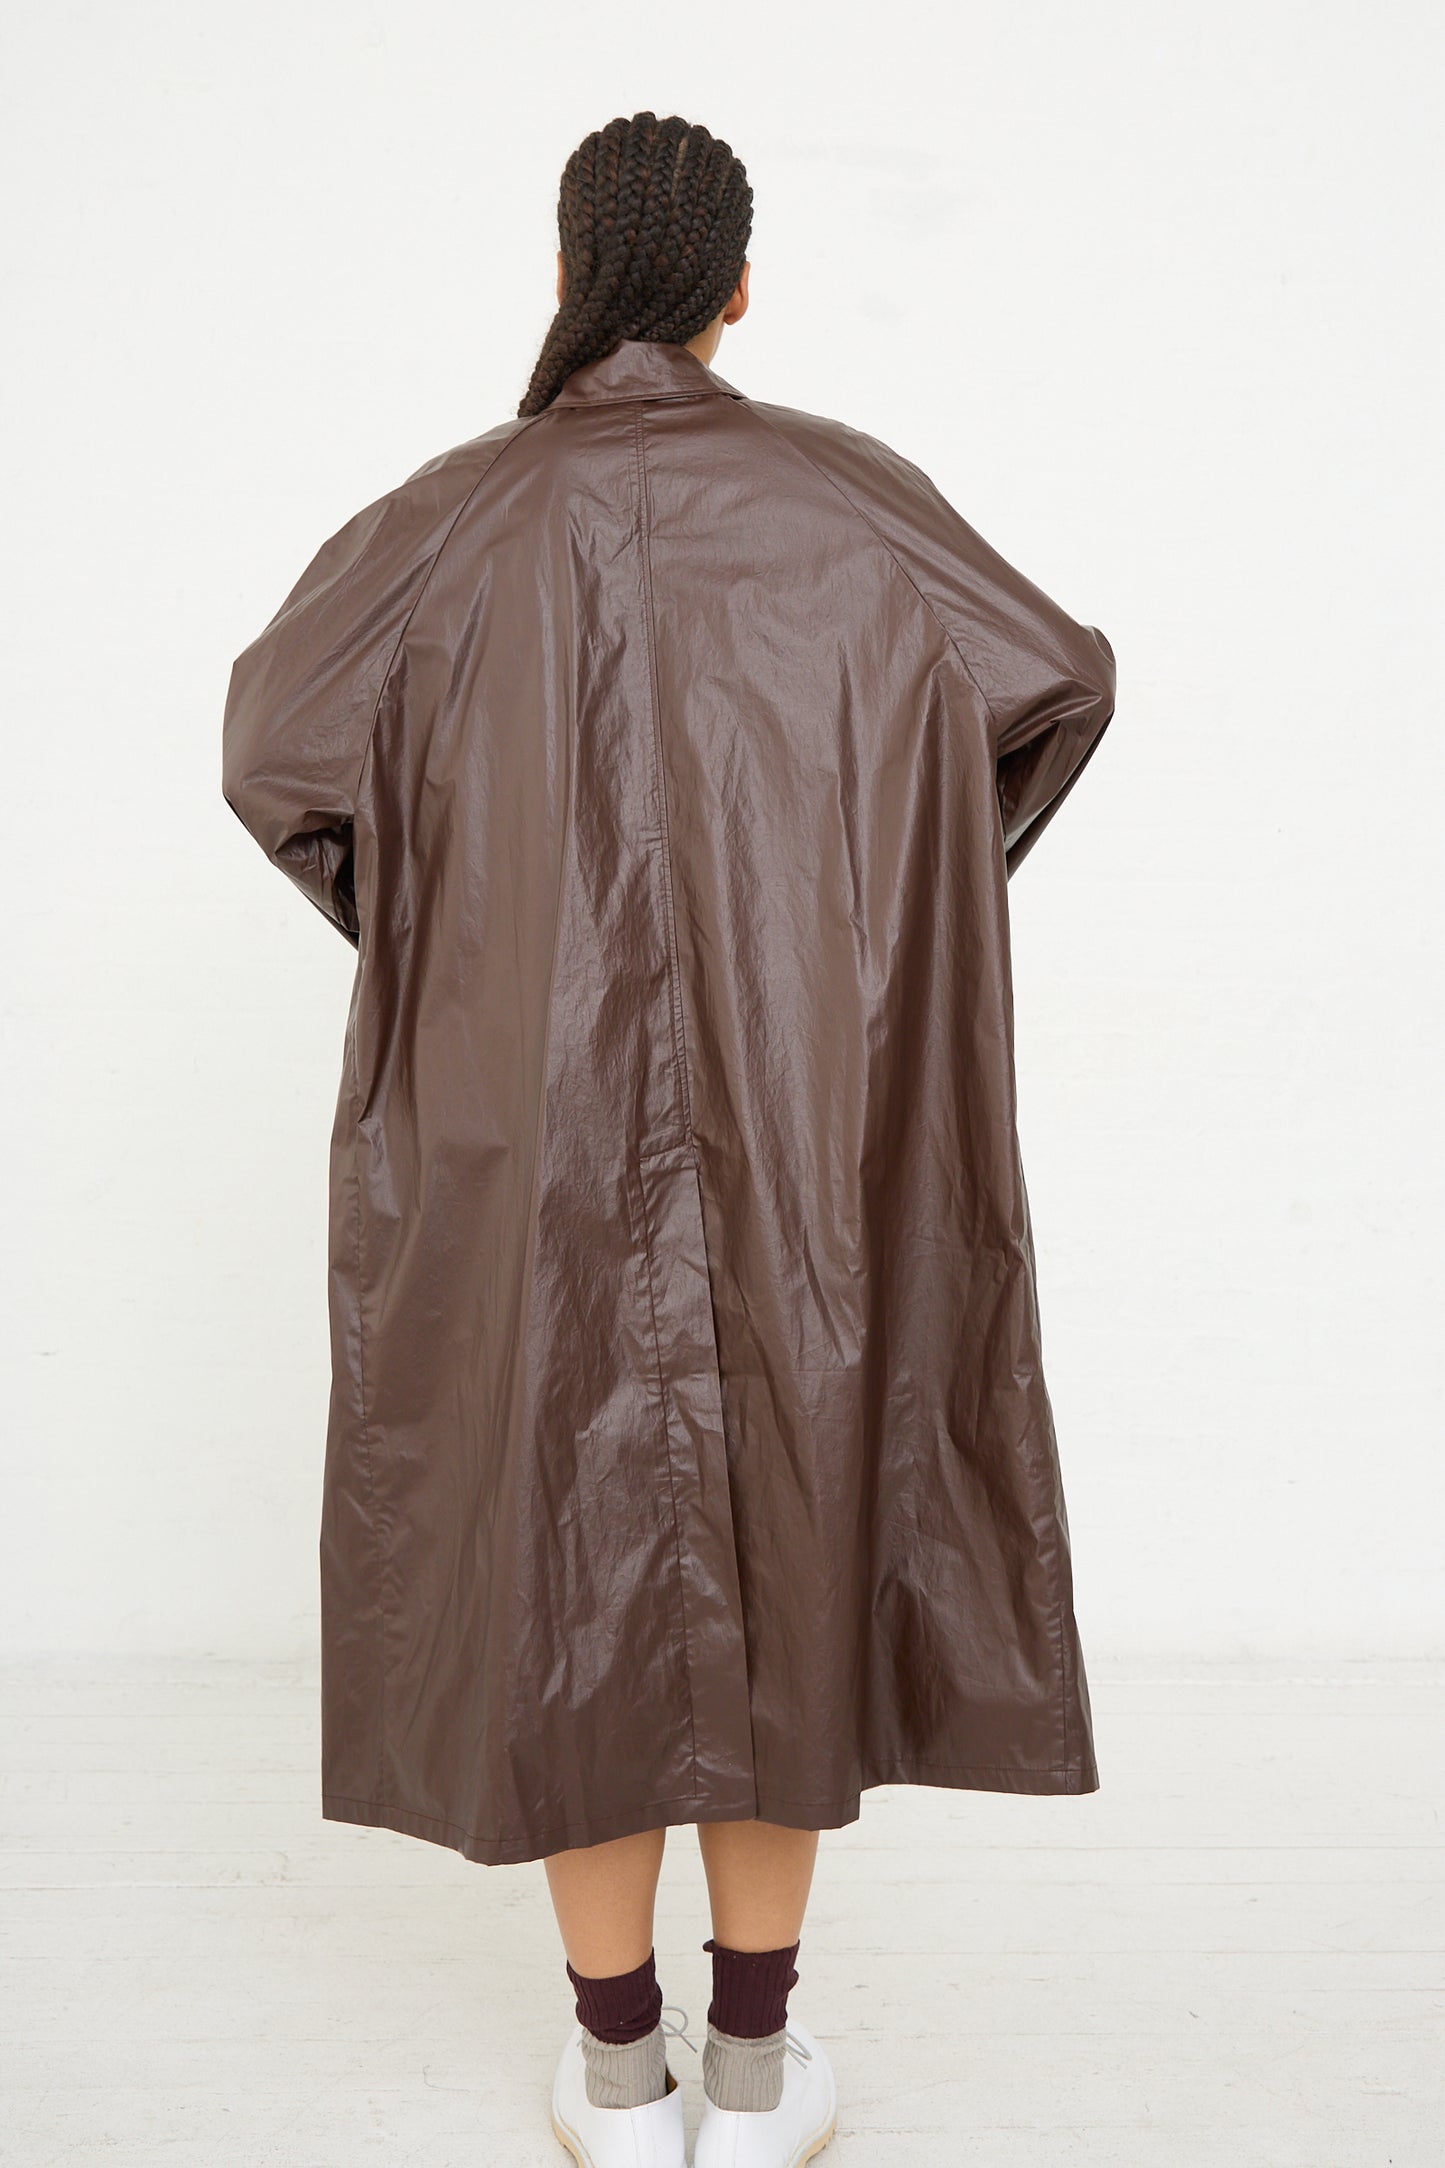 Person standing with their back to the camera wearing a long Prune water-repellent trench coat from Cordera and white sneakers.